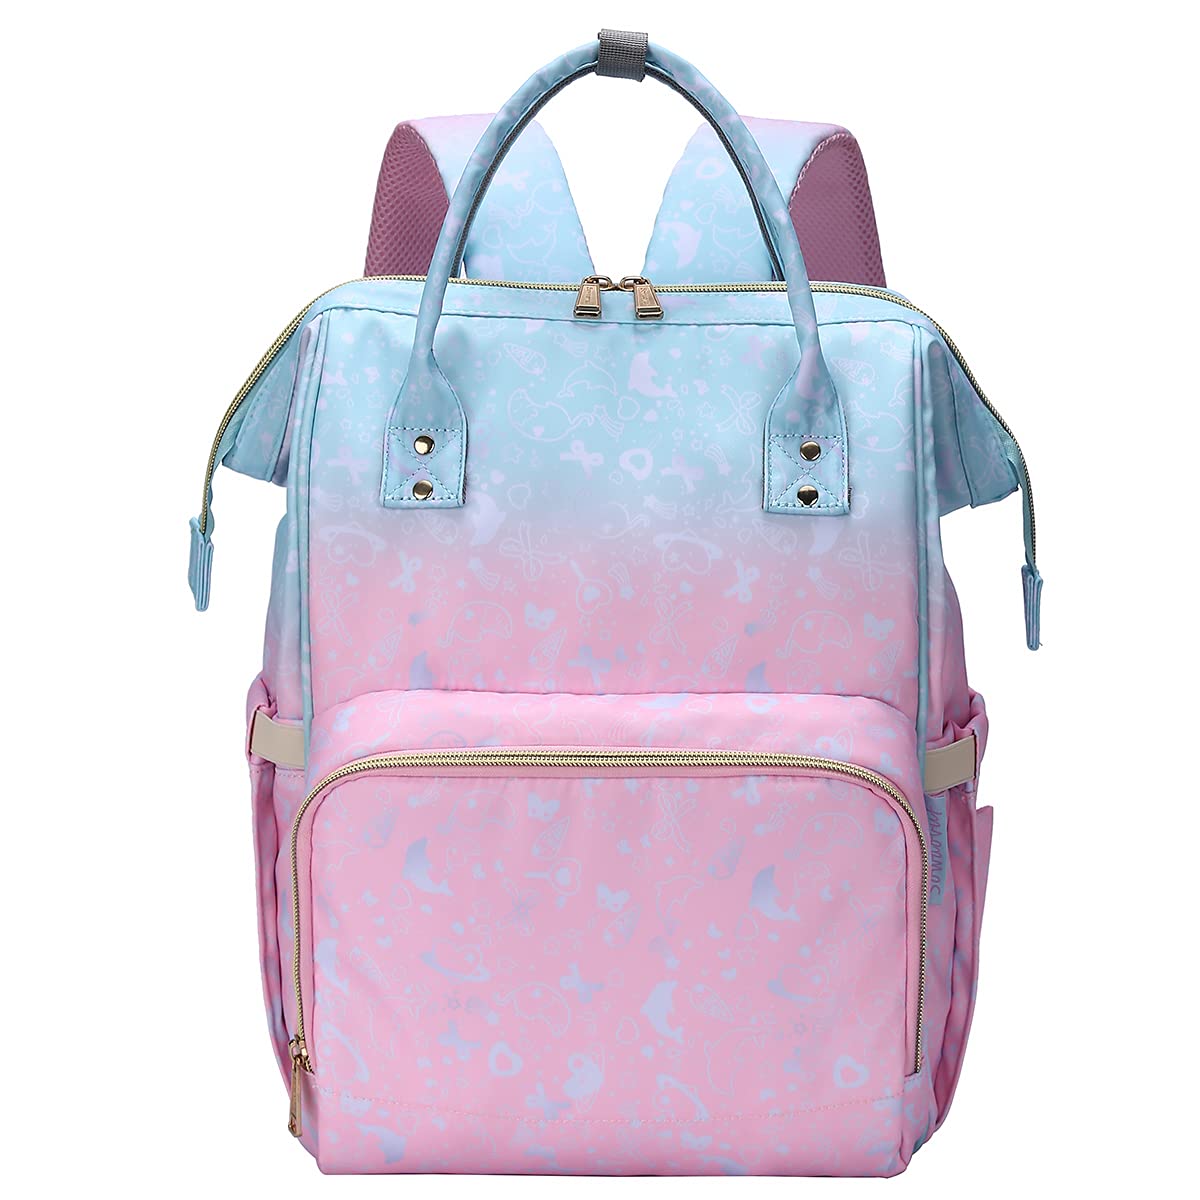 One of my favorite diaper bags I get so many compliments from people its the cutest little bag and great space multiple pockets for smaller items like creams ointments and smaller baby items